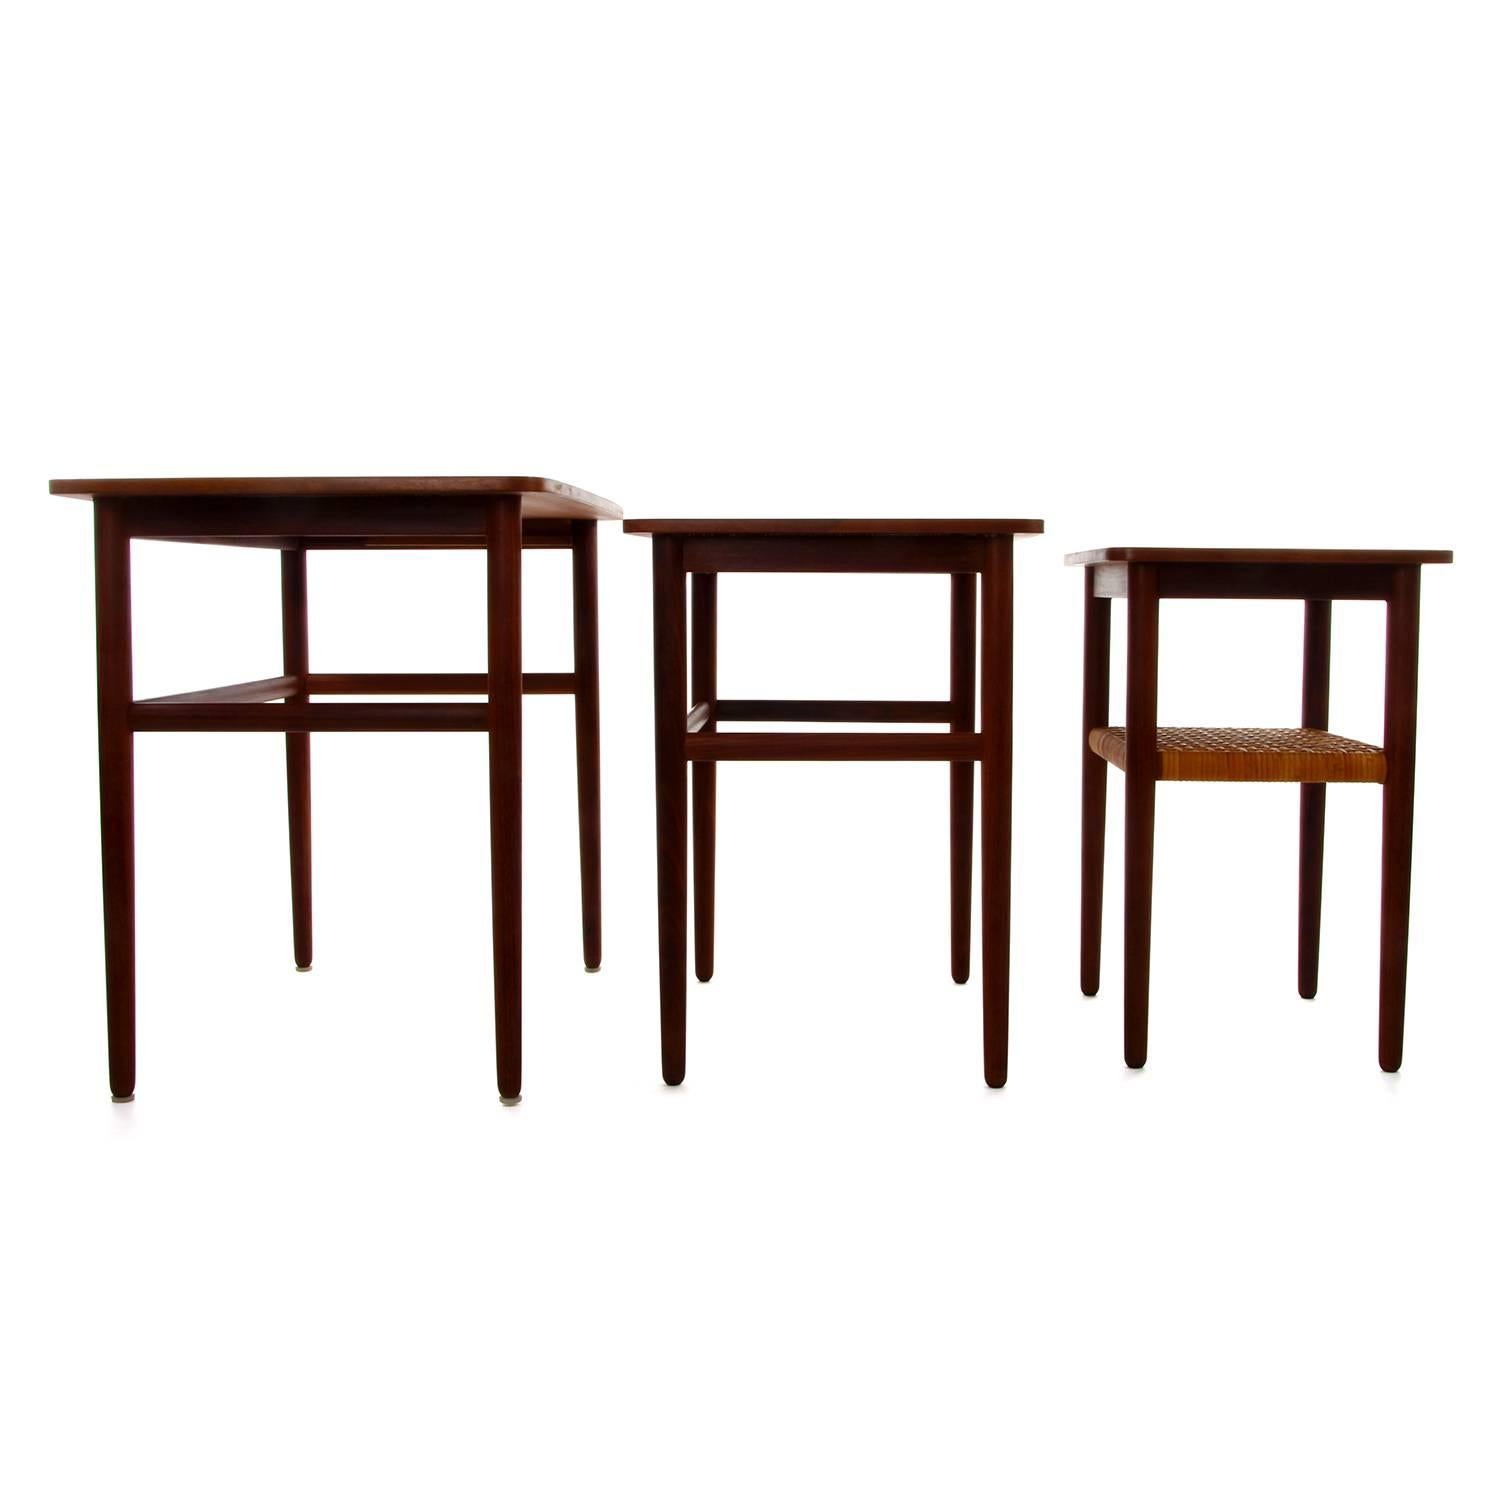 20th Century Teak and Rosewood Nesting Tables, 1950s, Danish Mid-Century Modern Nested Tables